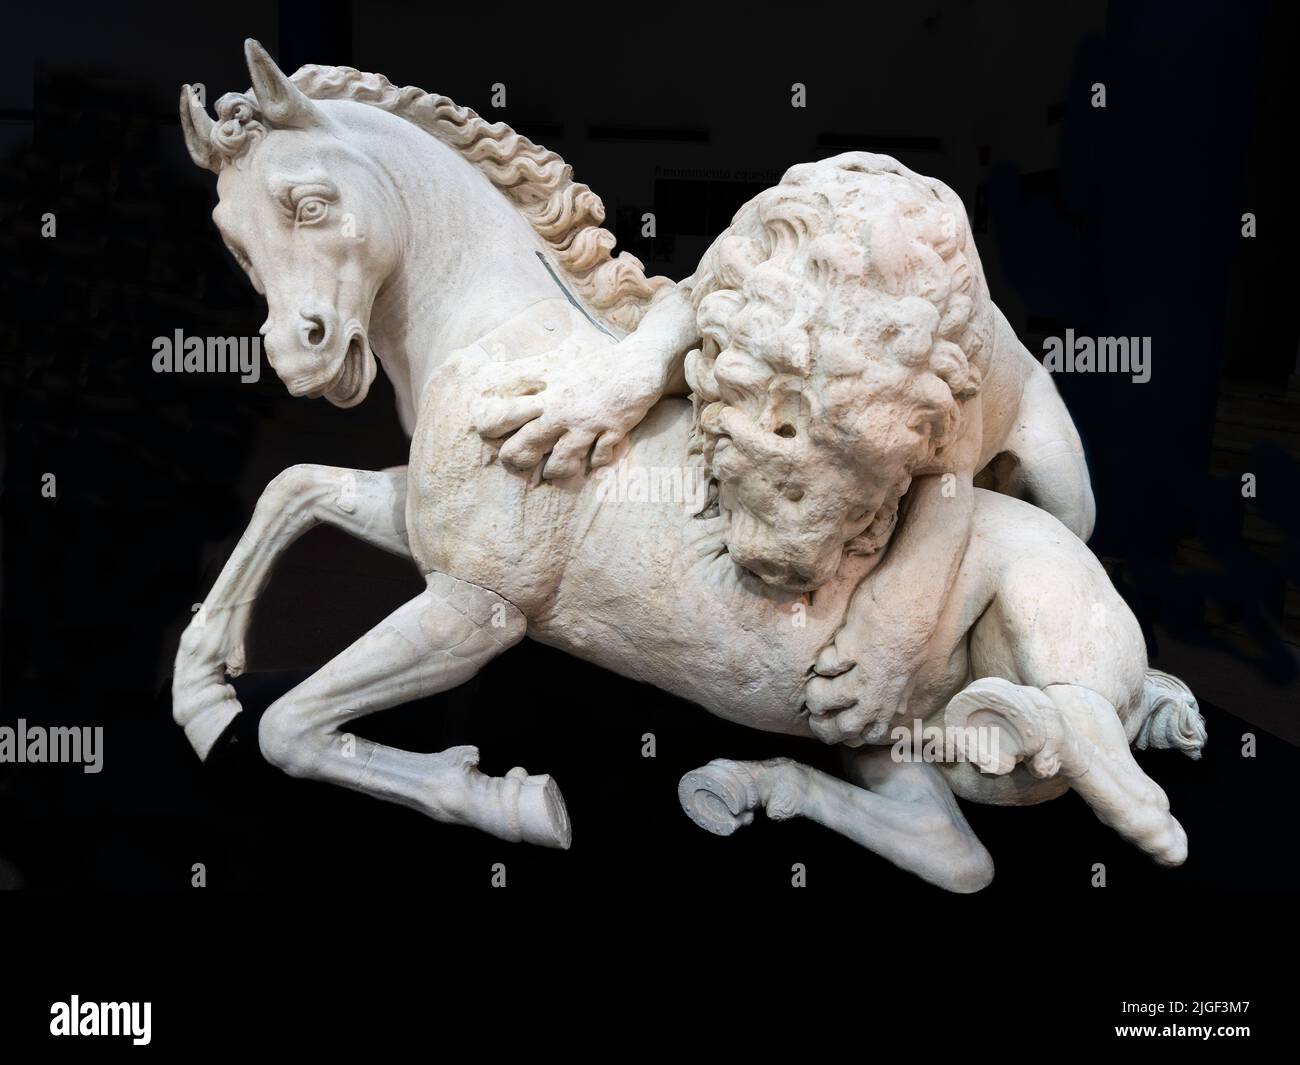 A horse being attacked by a lion,  Greek sculpture circa 325 - 300 BC. Restored in 1594 by Ruggero Bascape. In the Capitoline Museum, Rome, Italy. Stock Photo